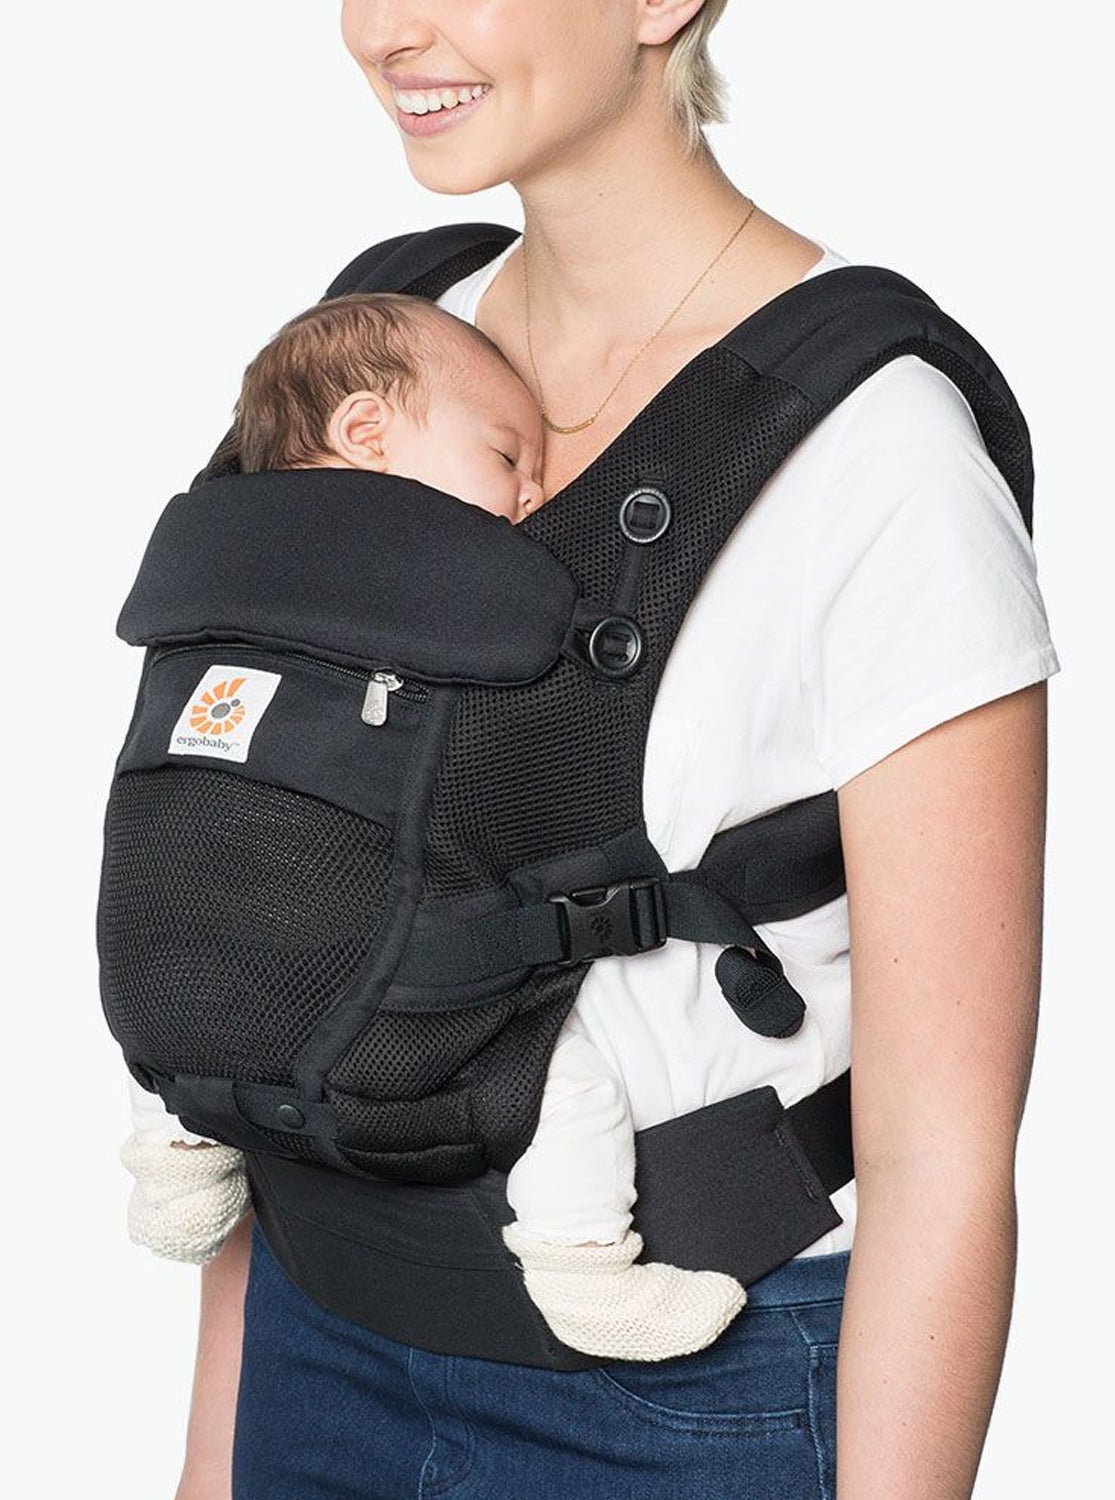 Ergobaby Adapt Cool Air Mesh Carrier. Free delivery. 30-day returns.